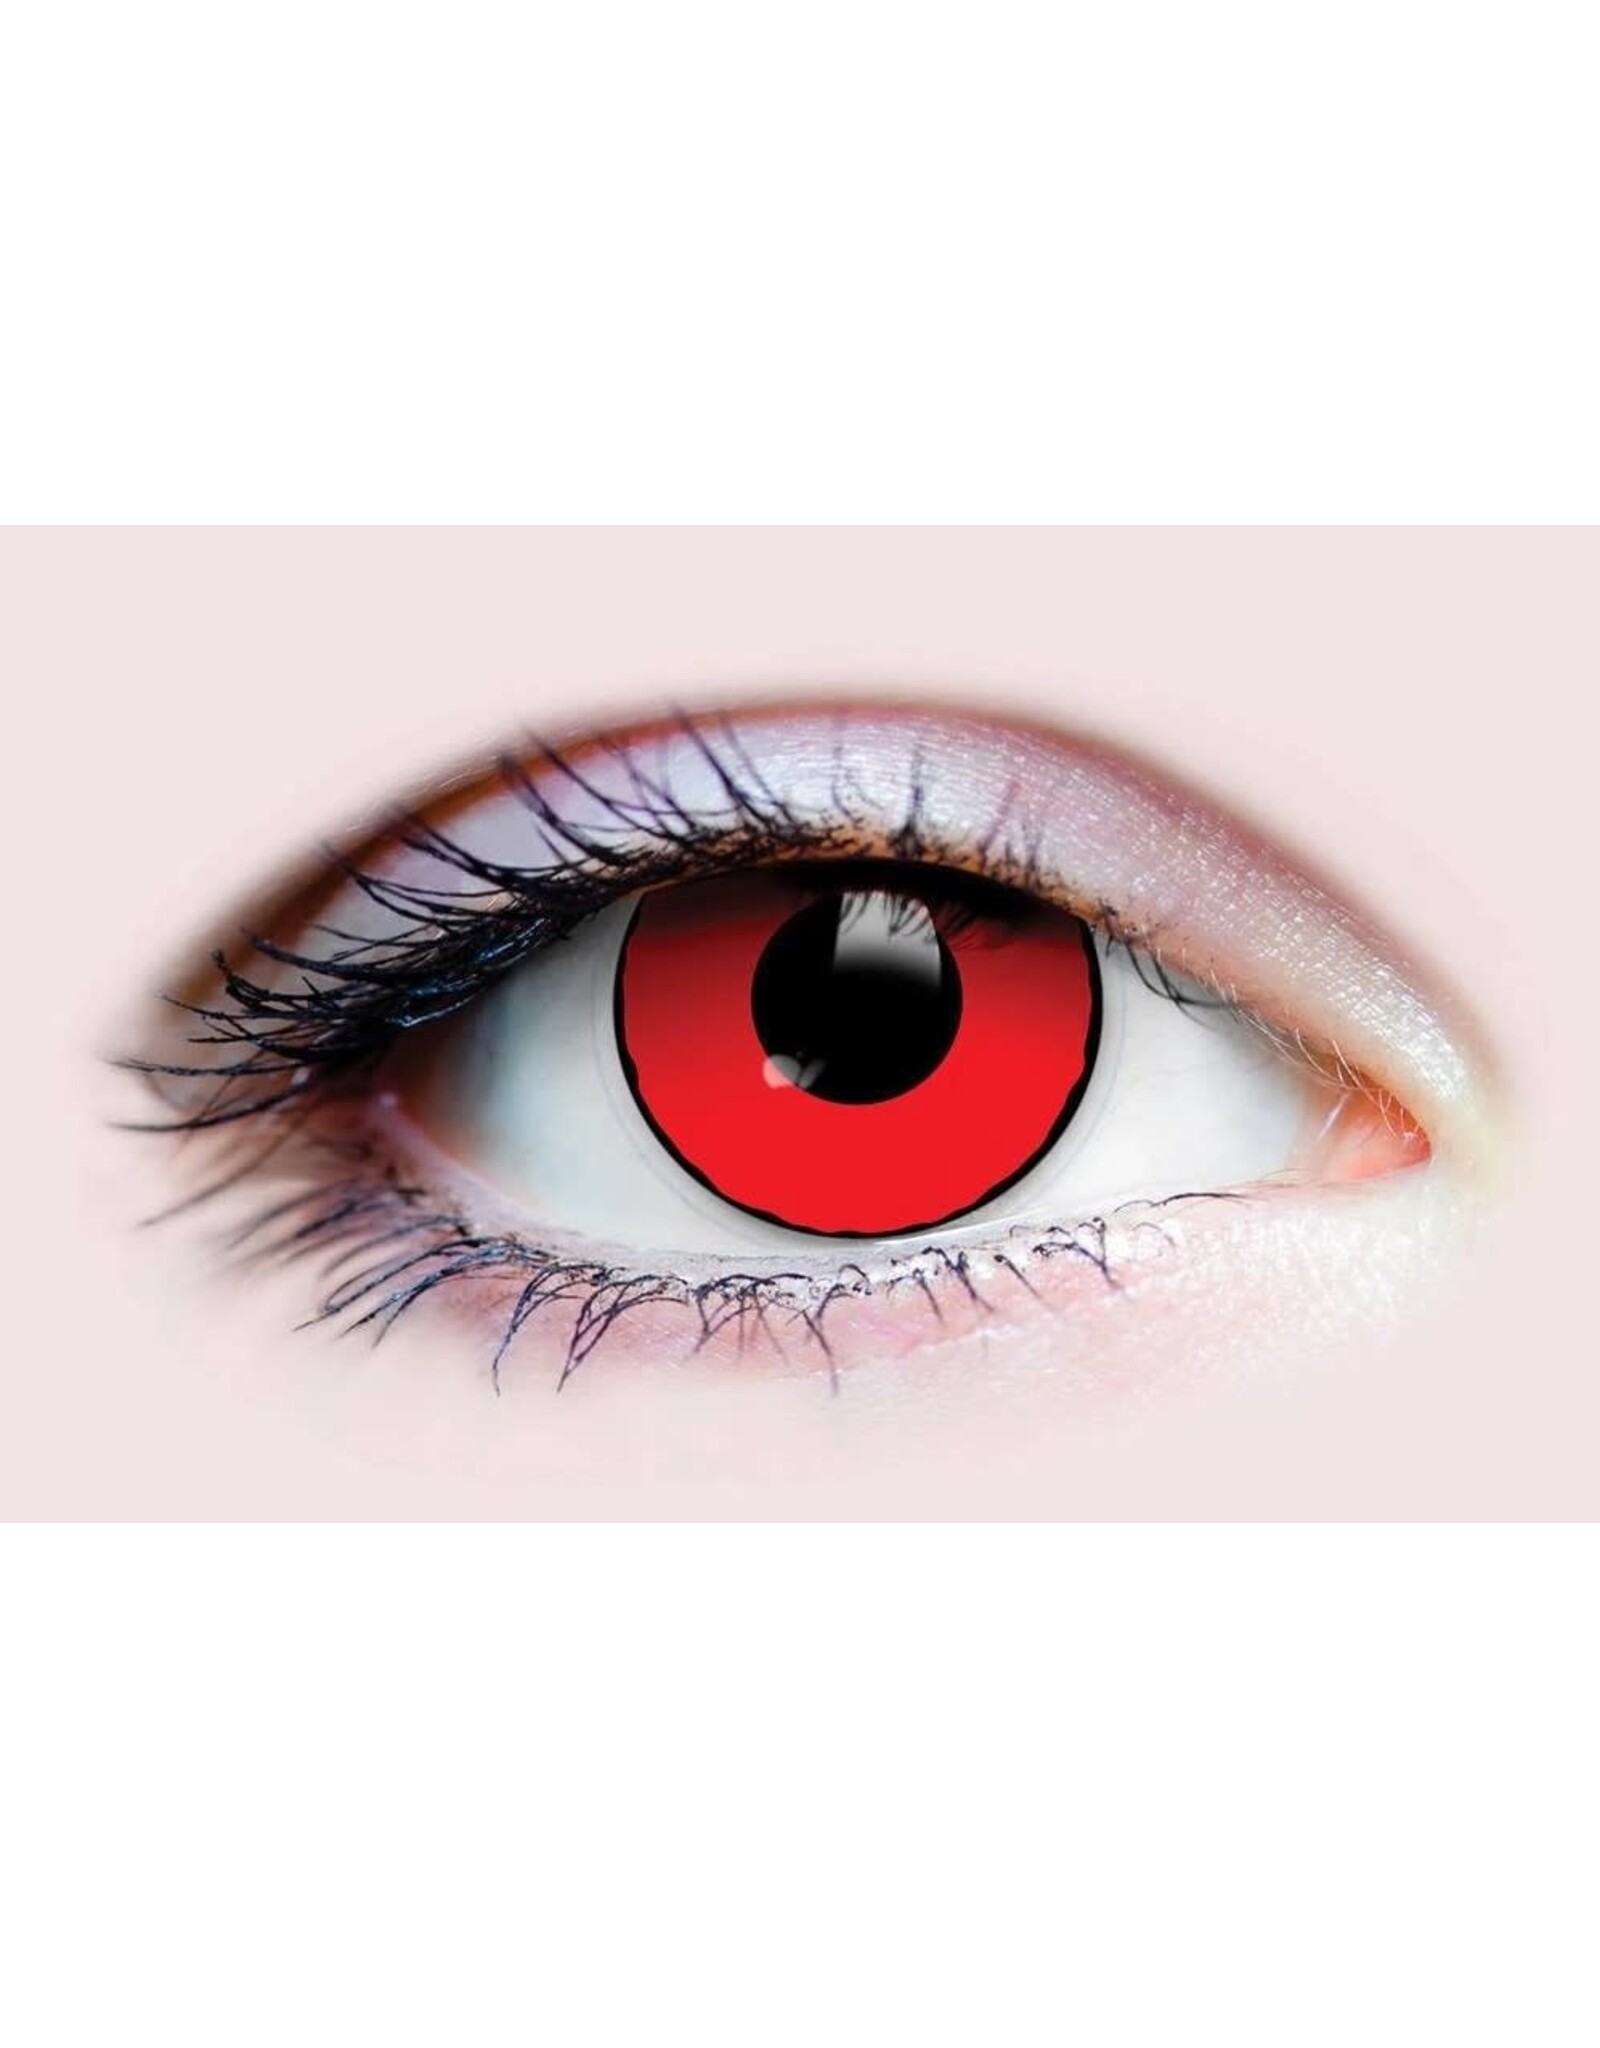 Primal Costume Contact Lenses - 907 Blood Eyes